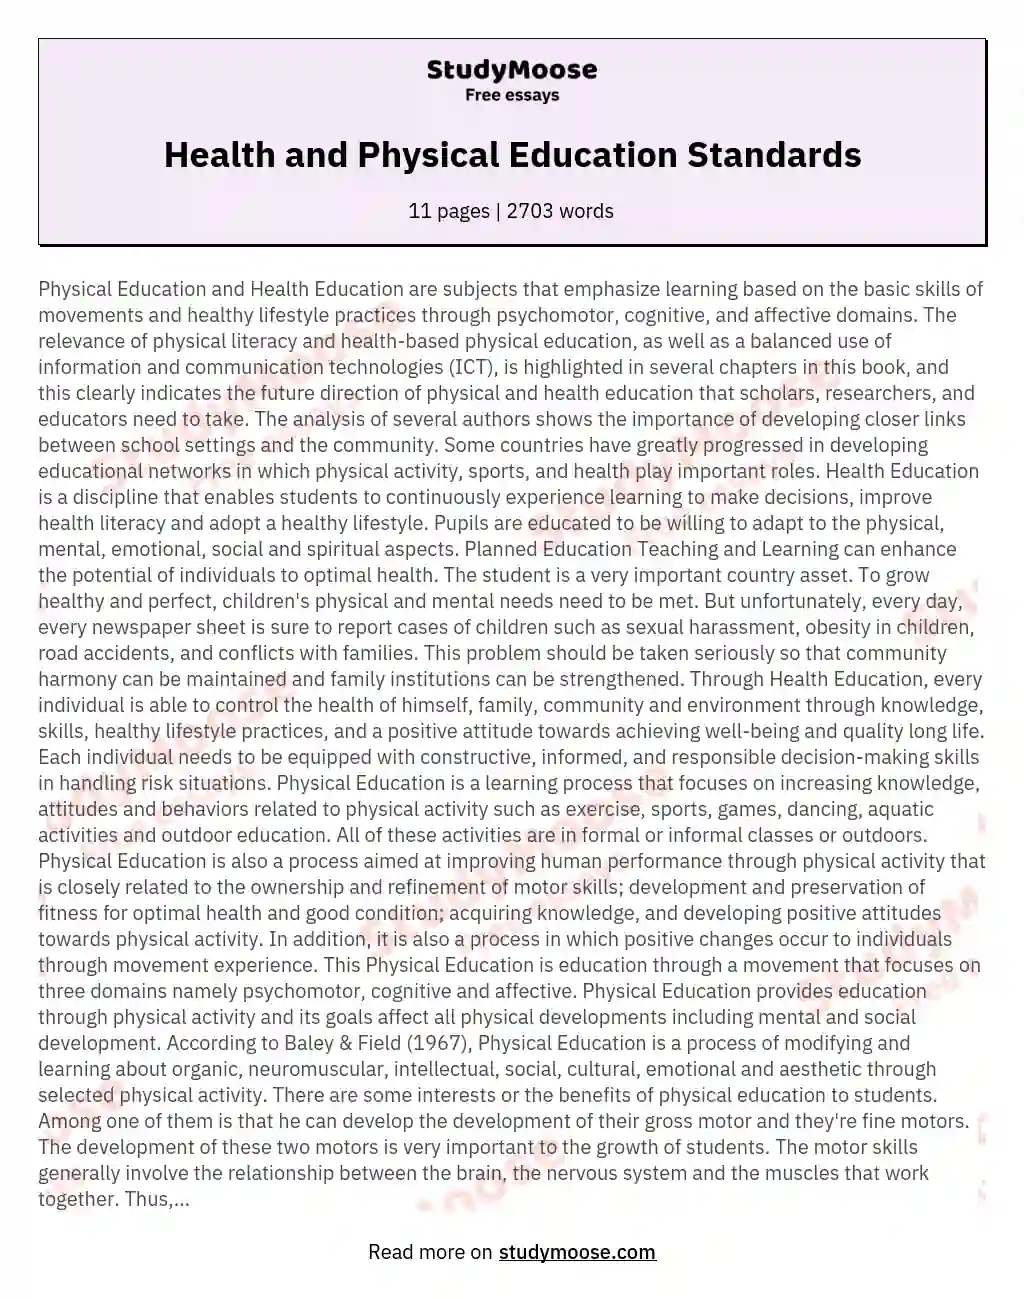 Health and Physical Education Standards